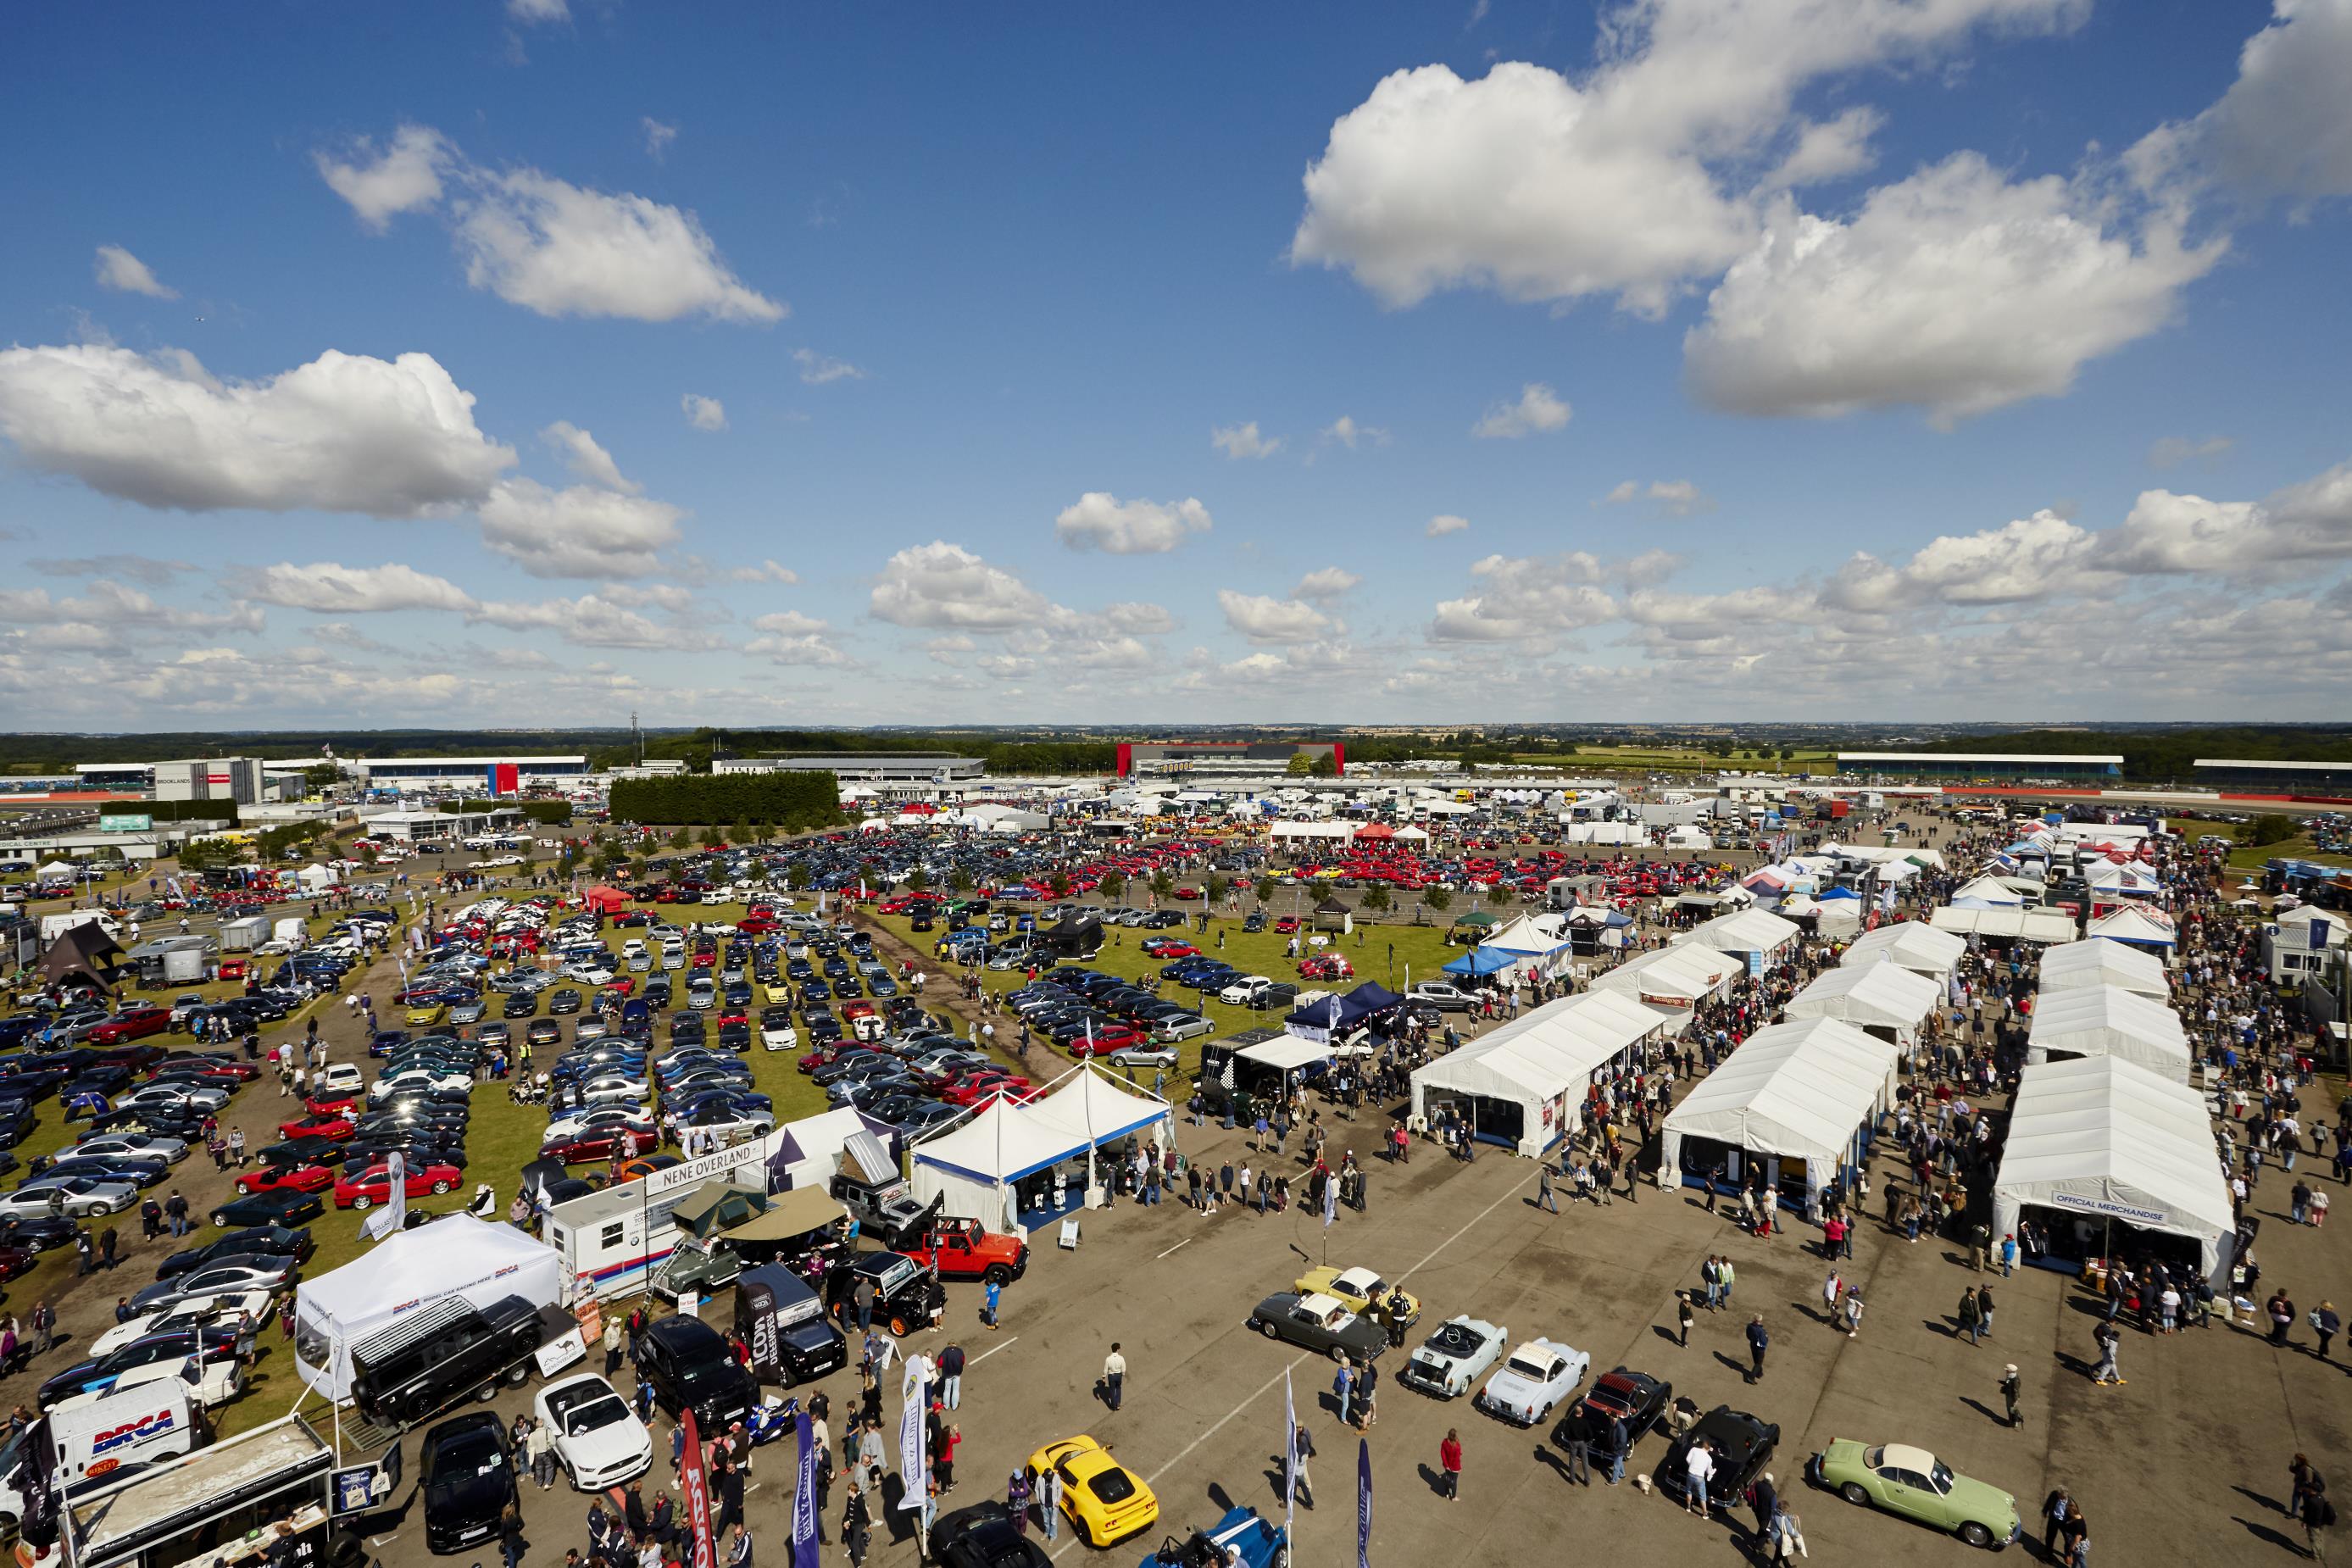 Silverstone Classic combines new and classic cars